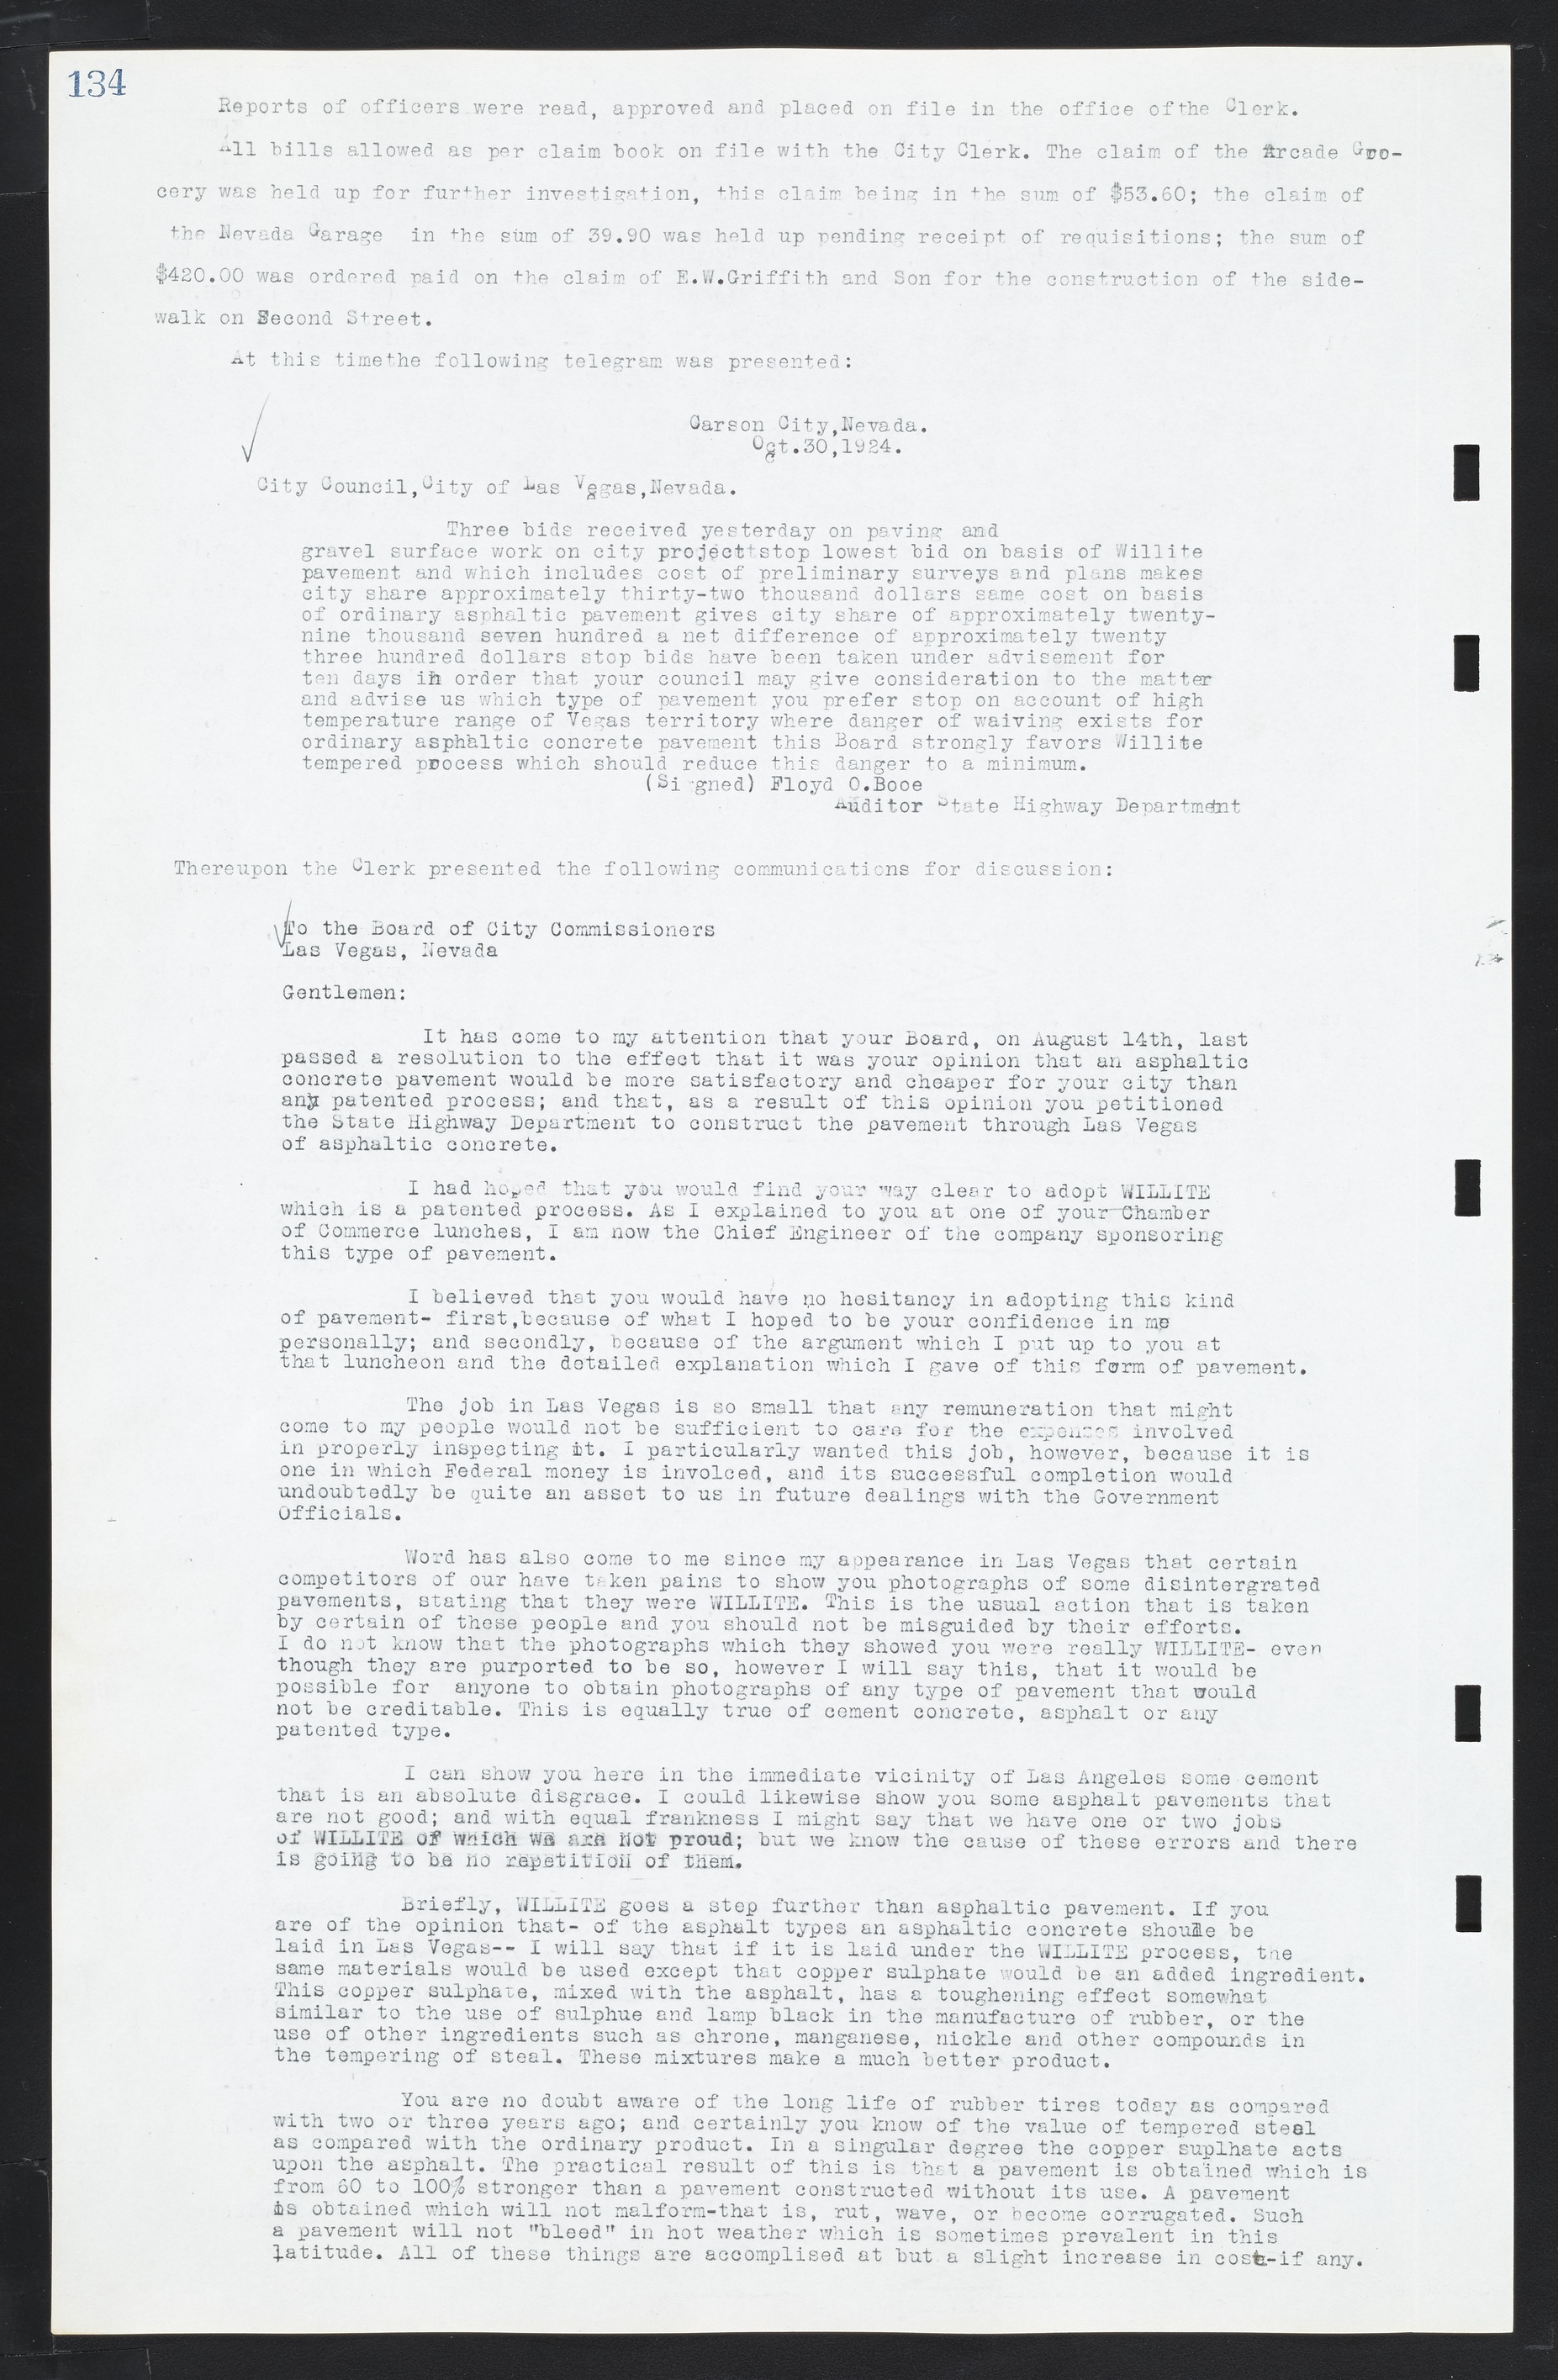 Las Vegas City Commission Minutes, March 1, 1922 to May 10, 1929, lvc000002-141